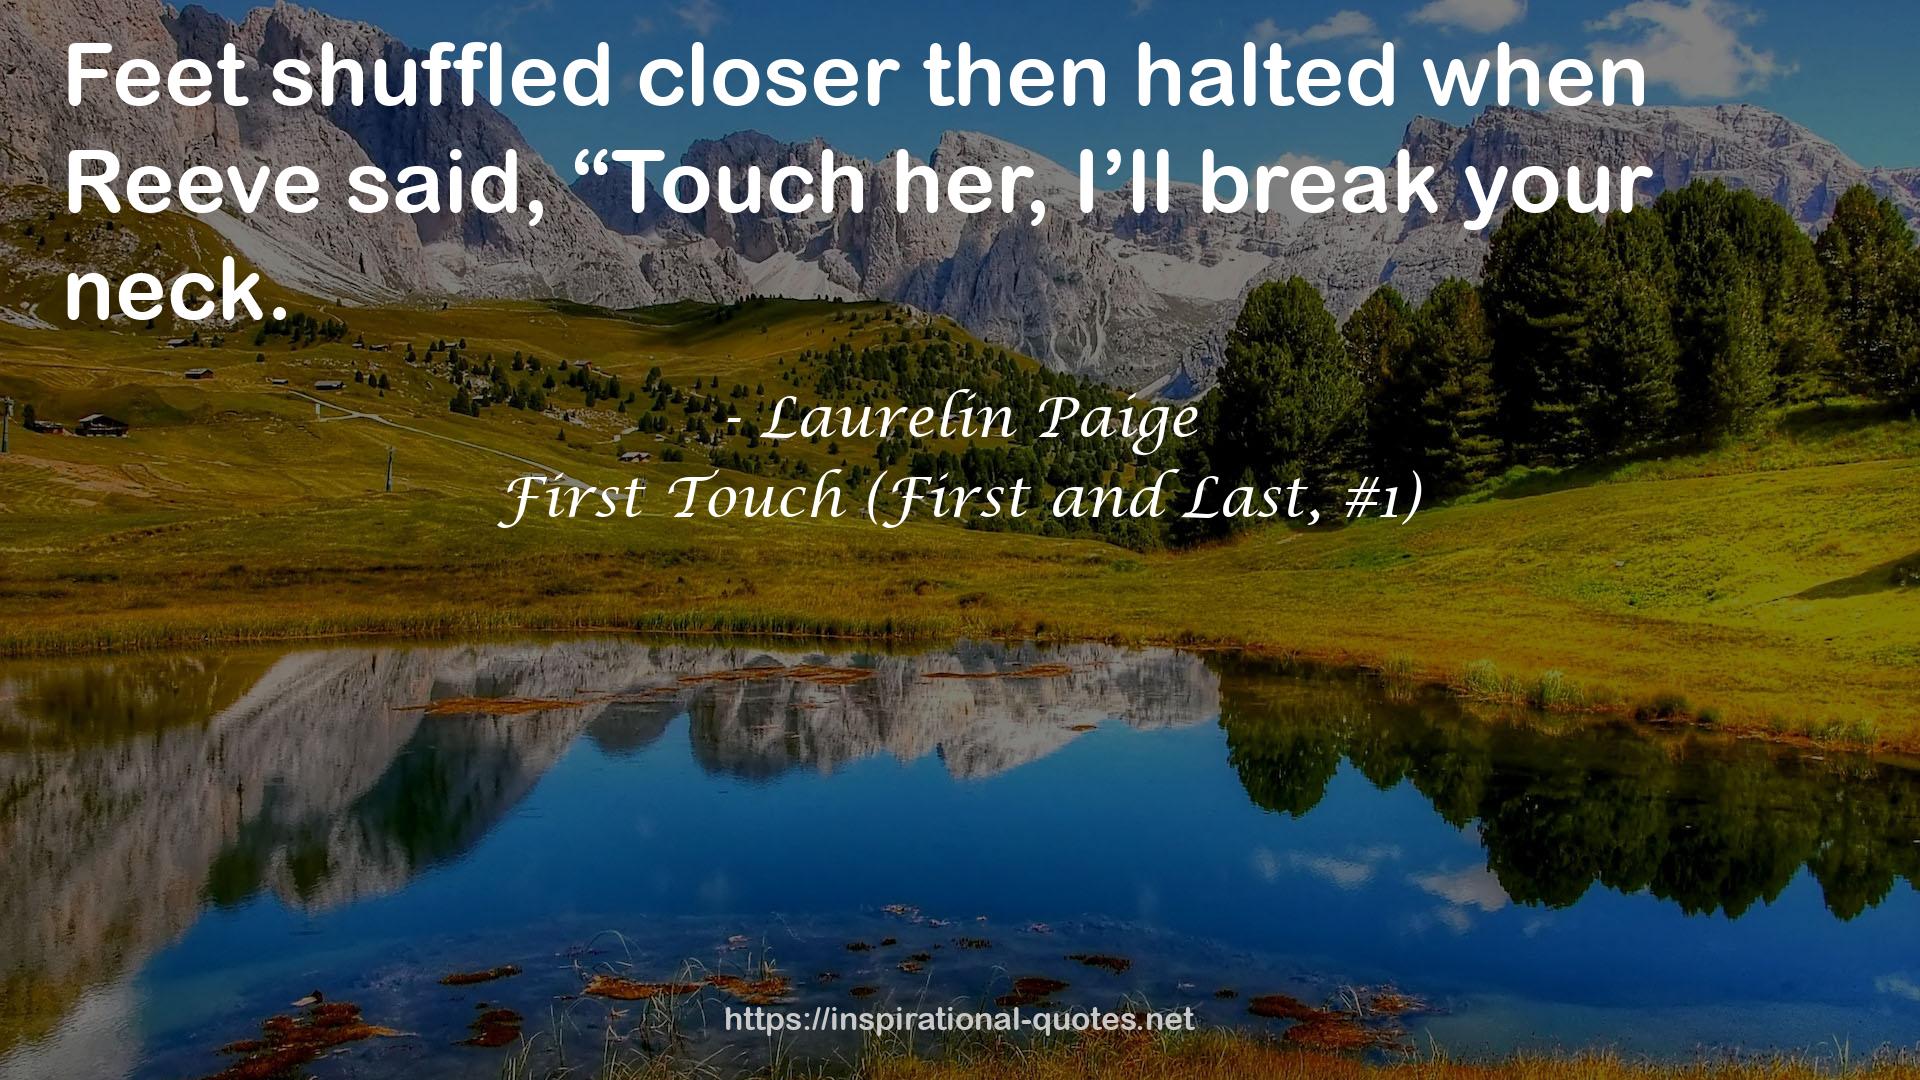 First Touch (First and Last, #1) QUOTES